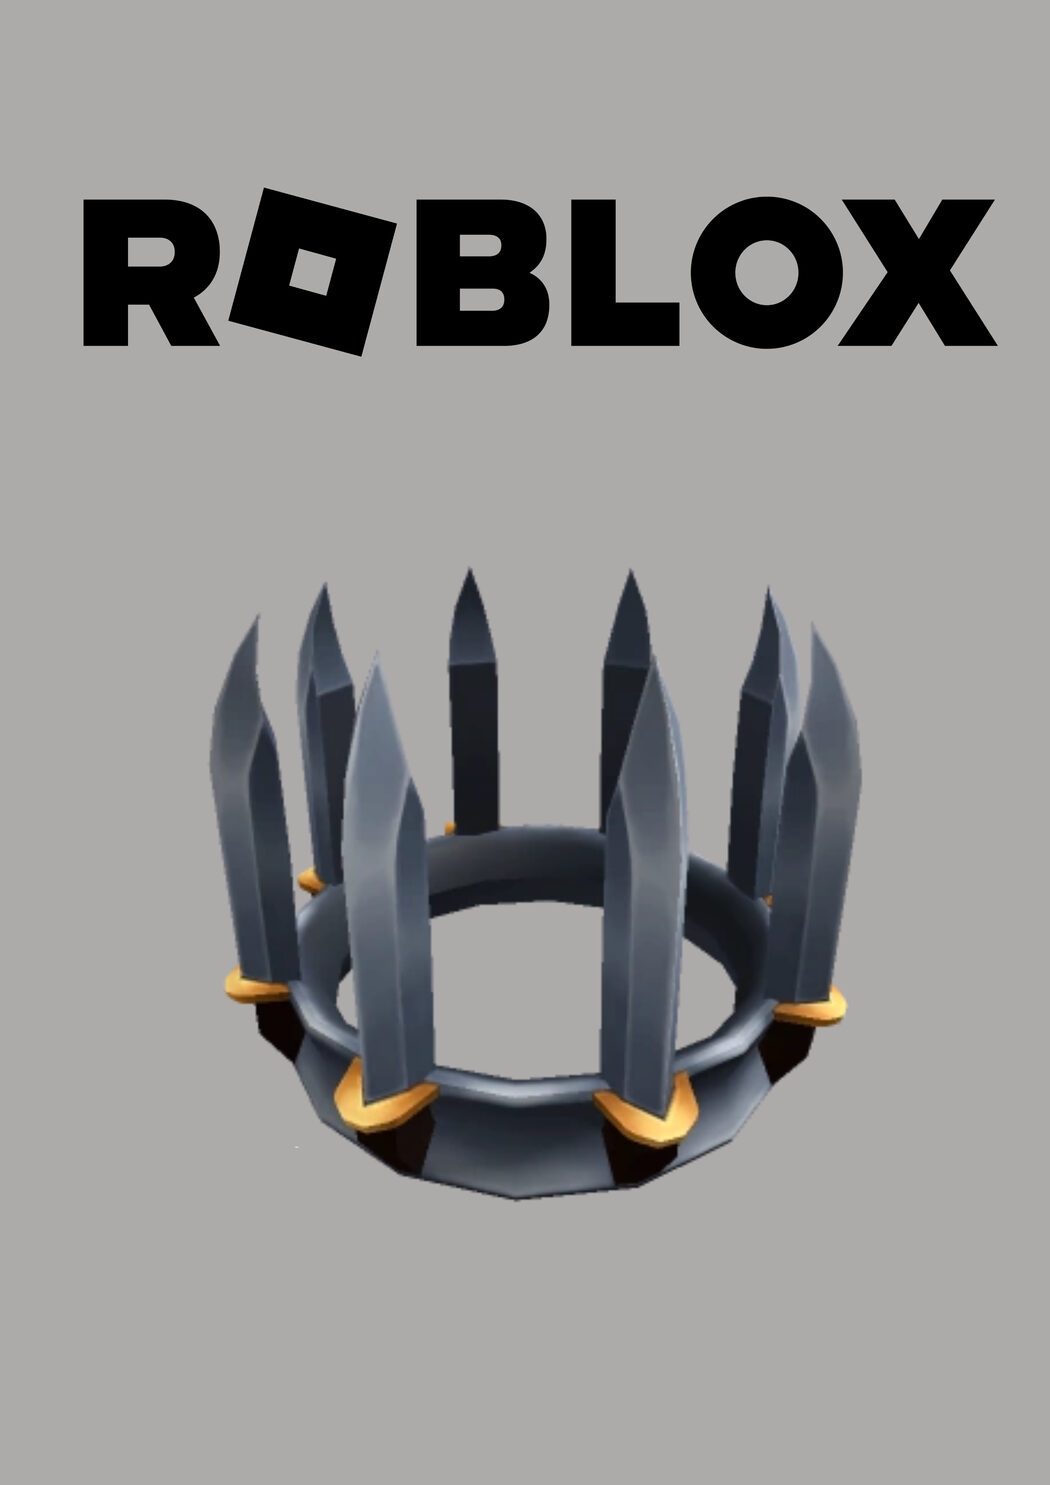 [MM2] Roblox Prime Gaming Key // Murder Mystery 2 Void knife